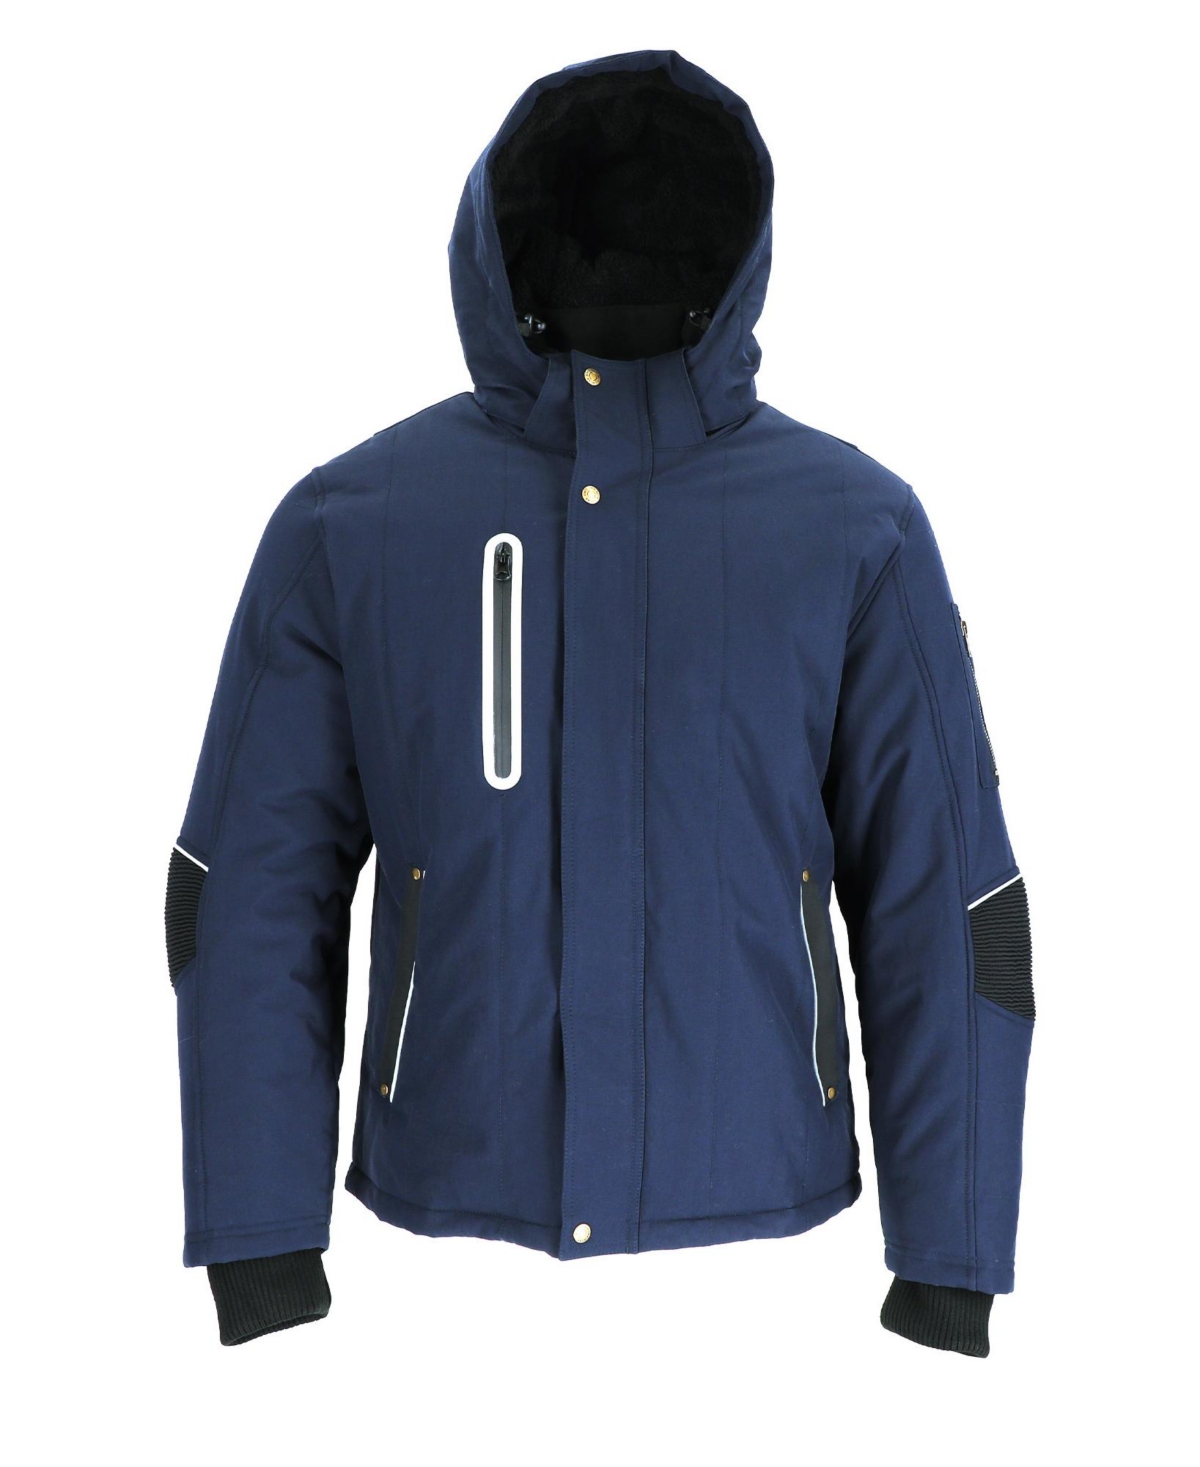 Big & Tall 54 Gold Hooded Utility Winter Jacket - Navy